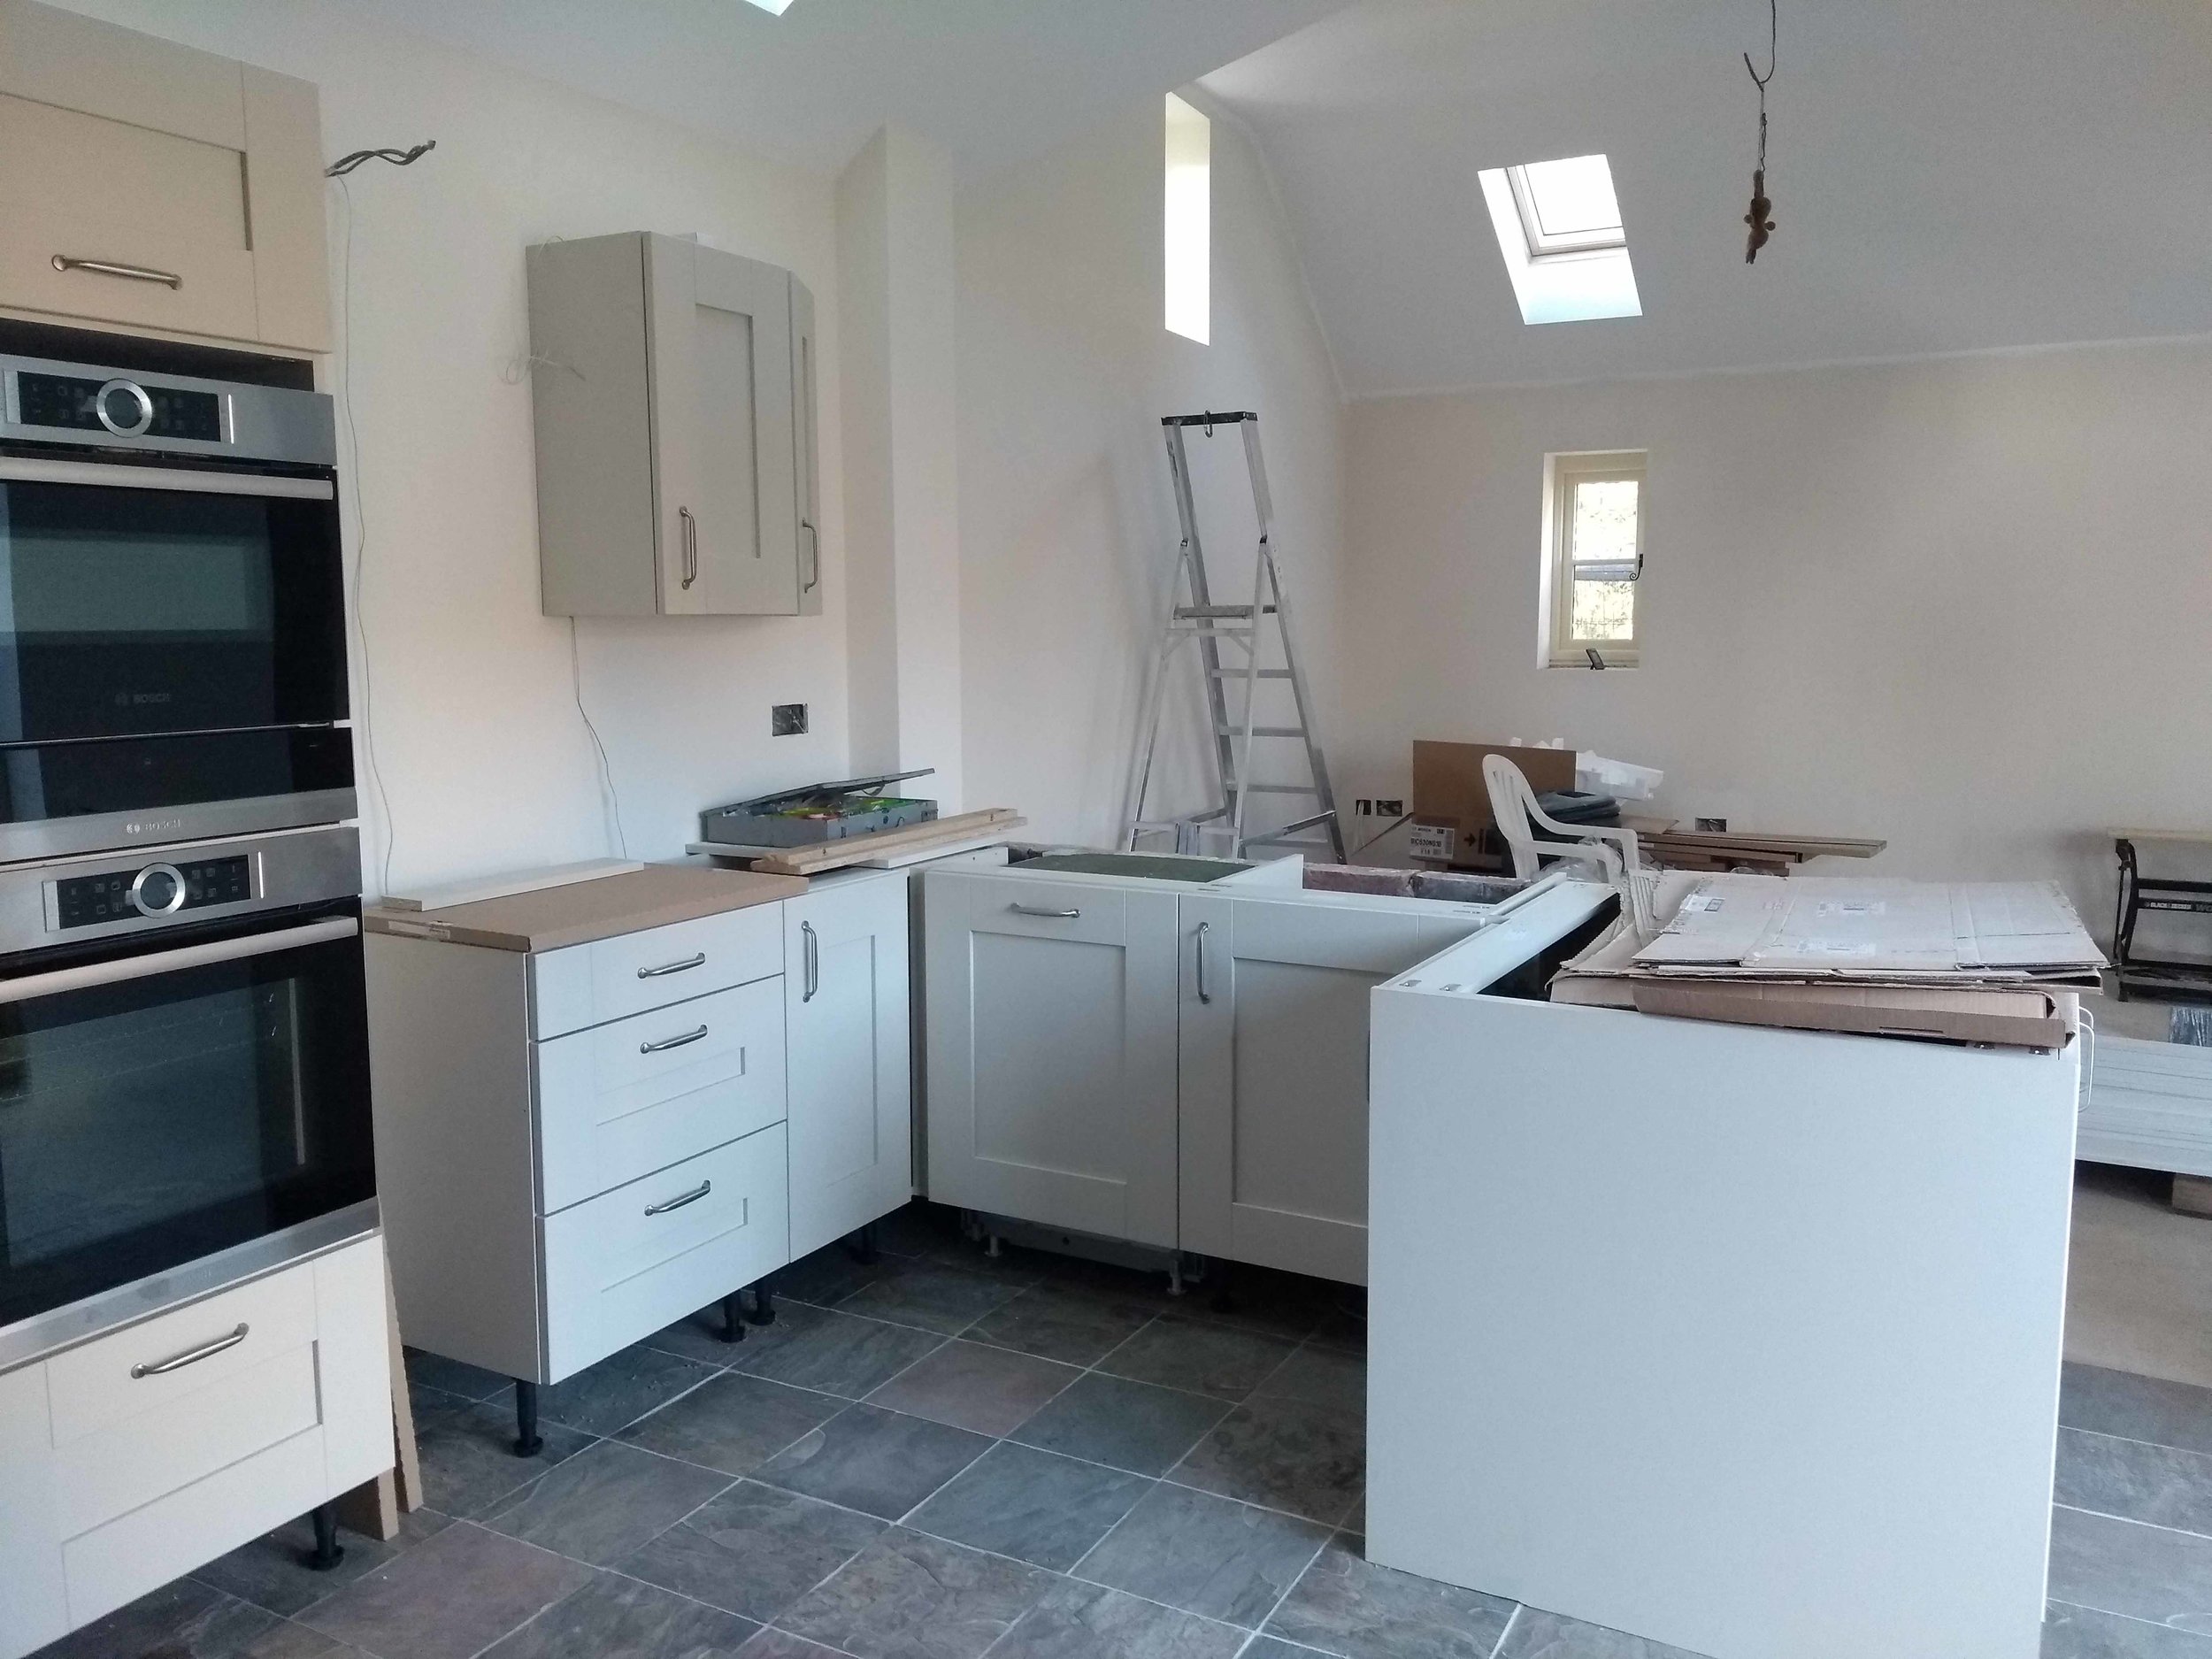 Kitchen from the utility room